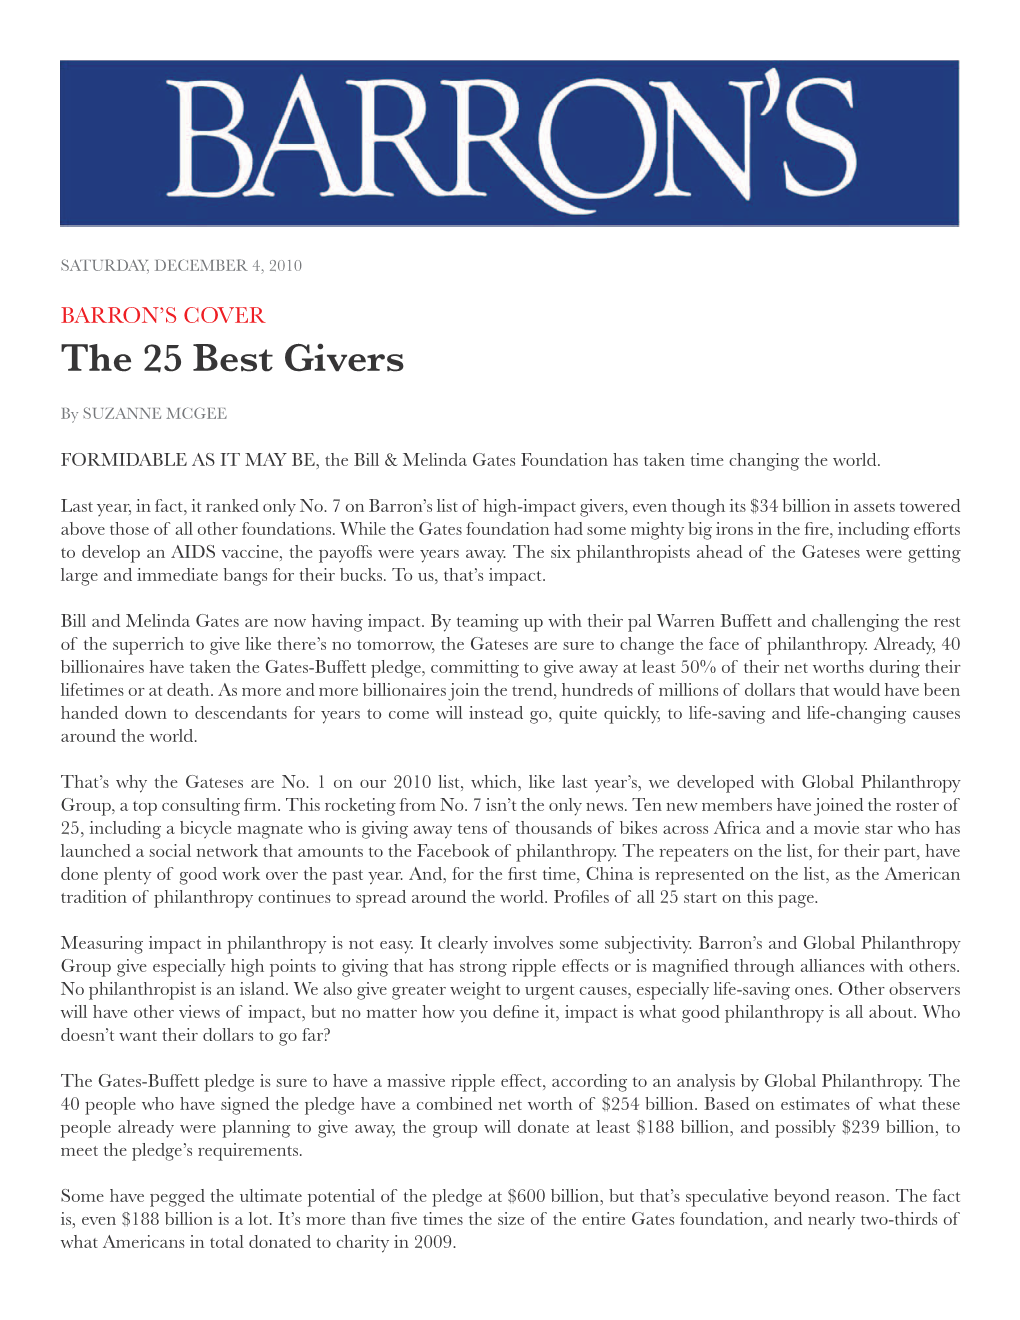 The 25 Best Givers